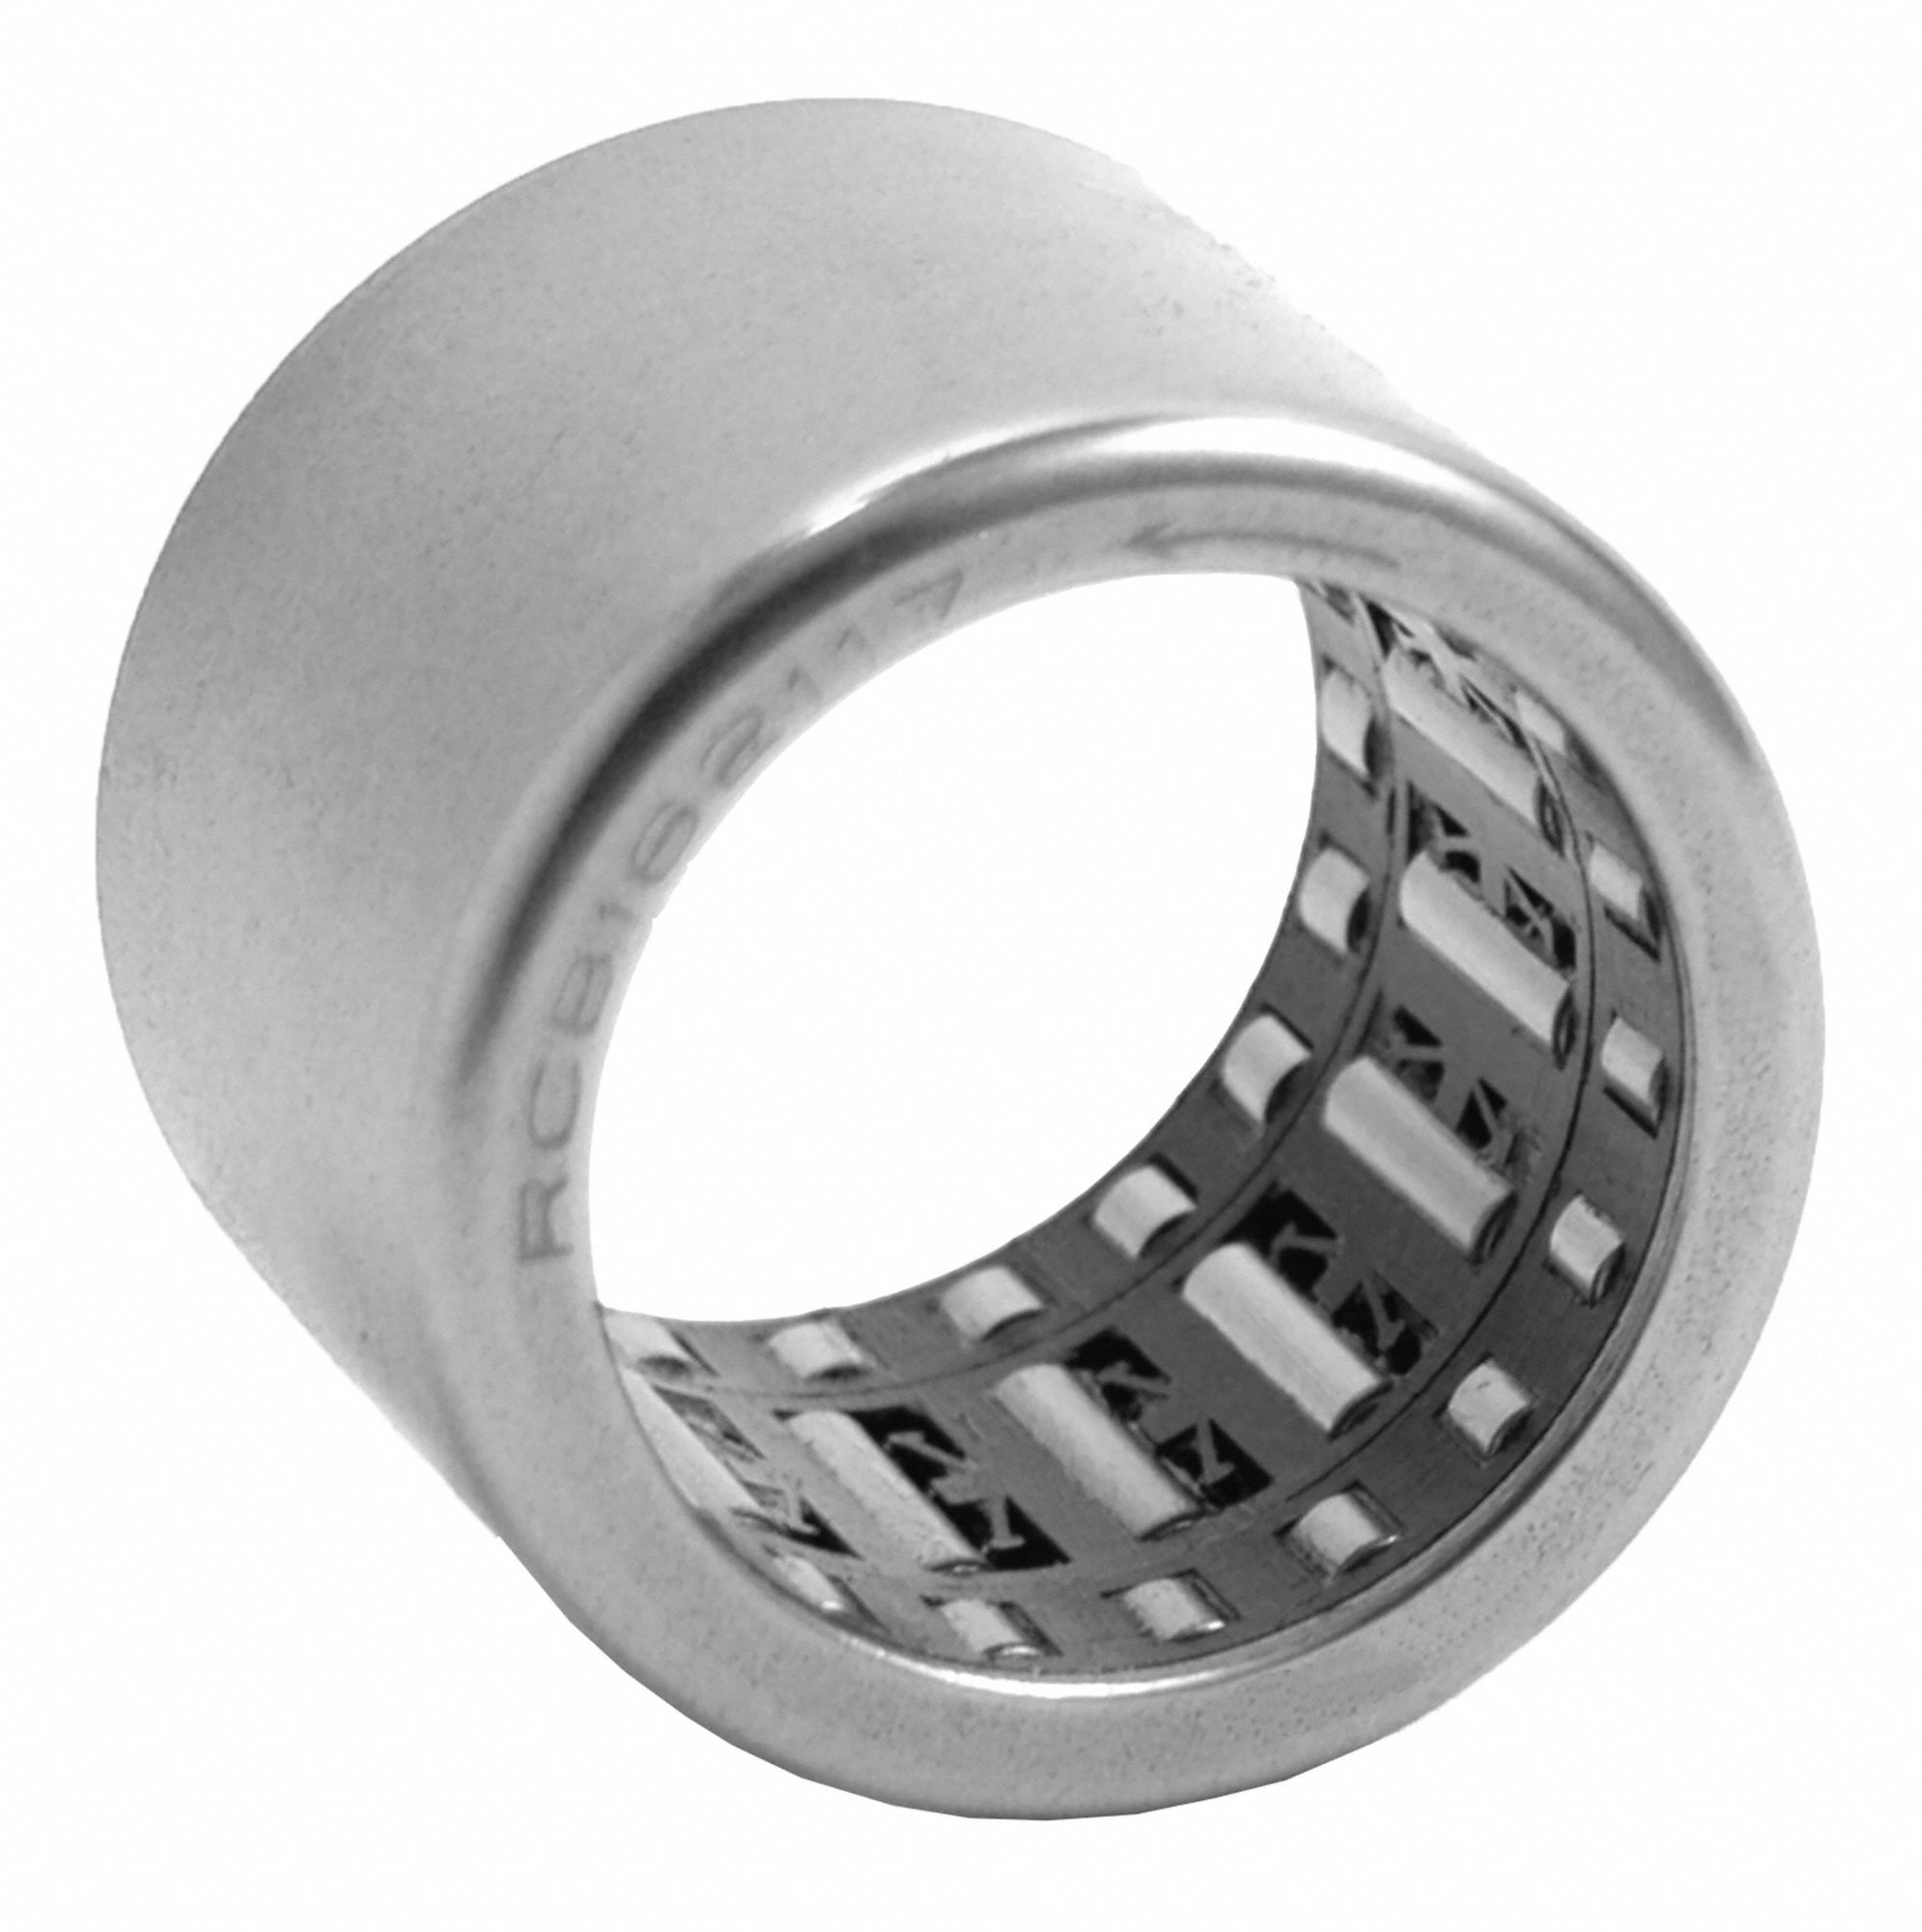 KOYO Needle Roller Bearing: RCB, 162117, 1 in Bore, 1 5/16 in OD, 3 Rows,  Open, 1.062 in Overall Wd